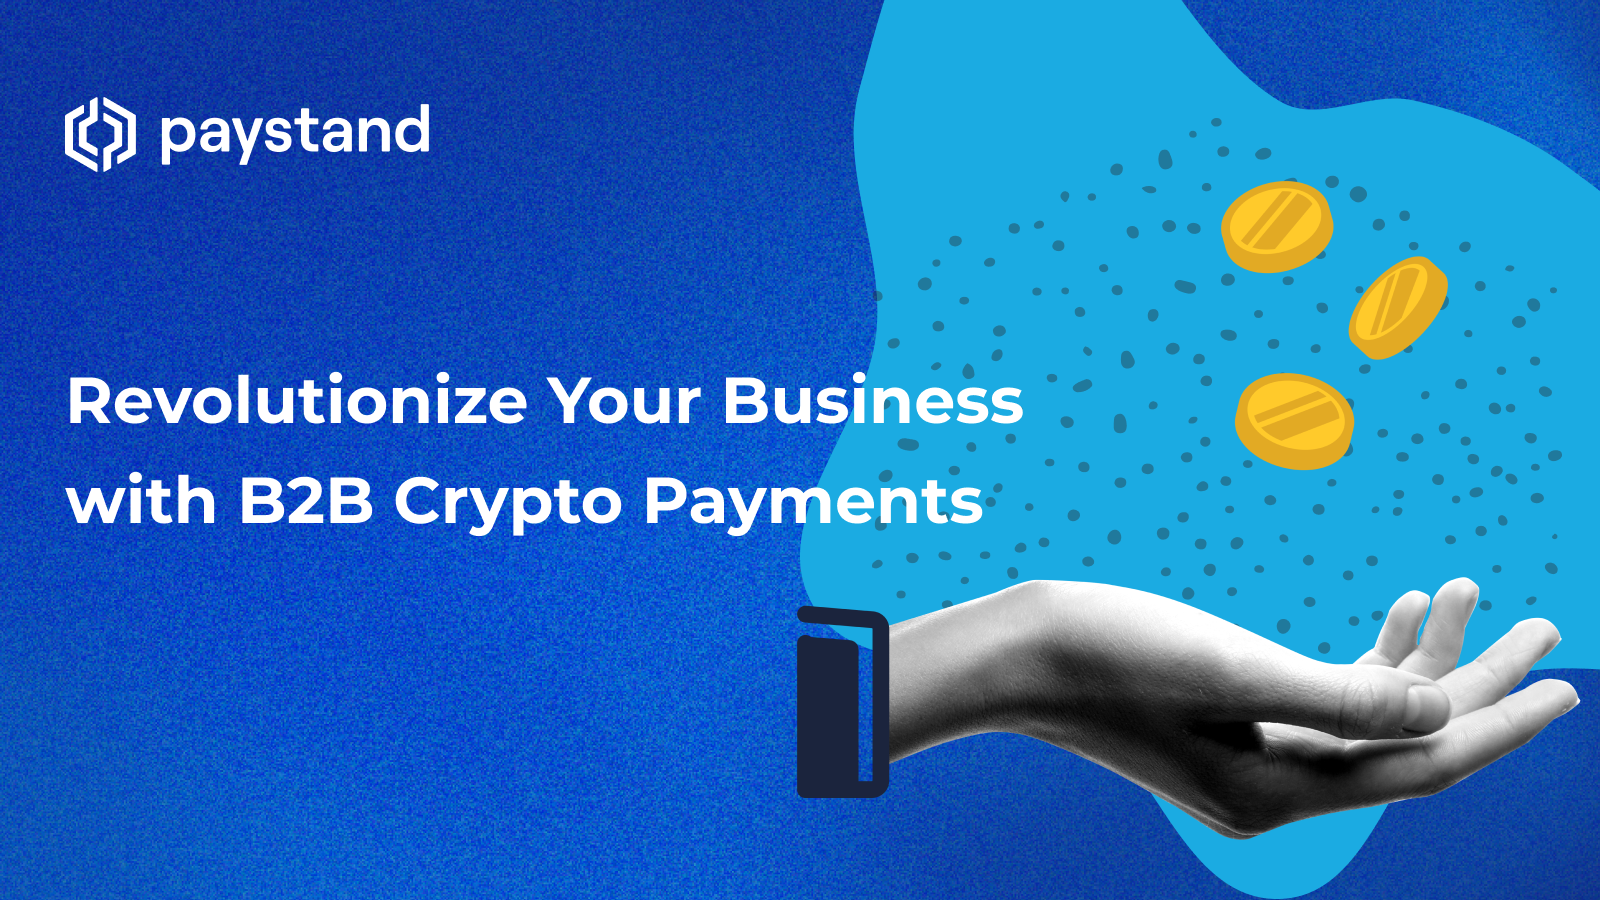 Revolutionize Your Business with B2B Crypto Payments